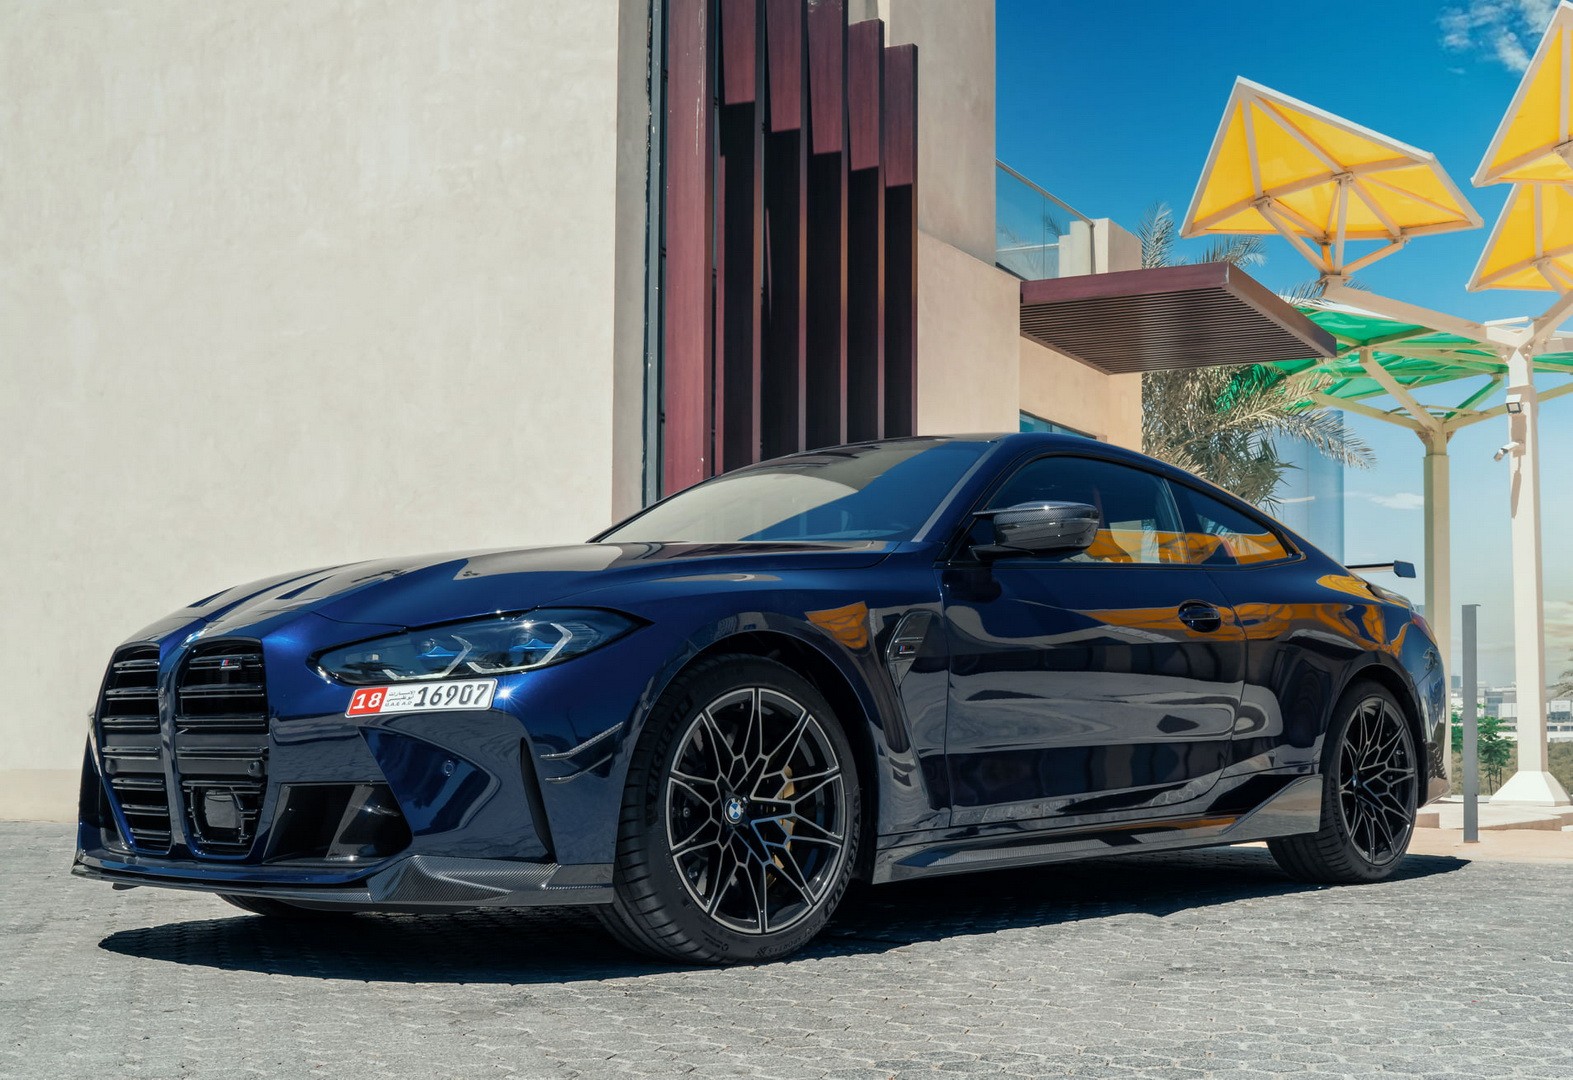 Tanzanite Blue BMW M4 Competition Rocking M Performance Parts Is a Show